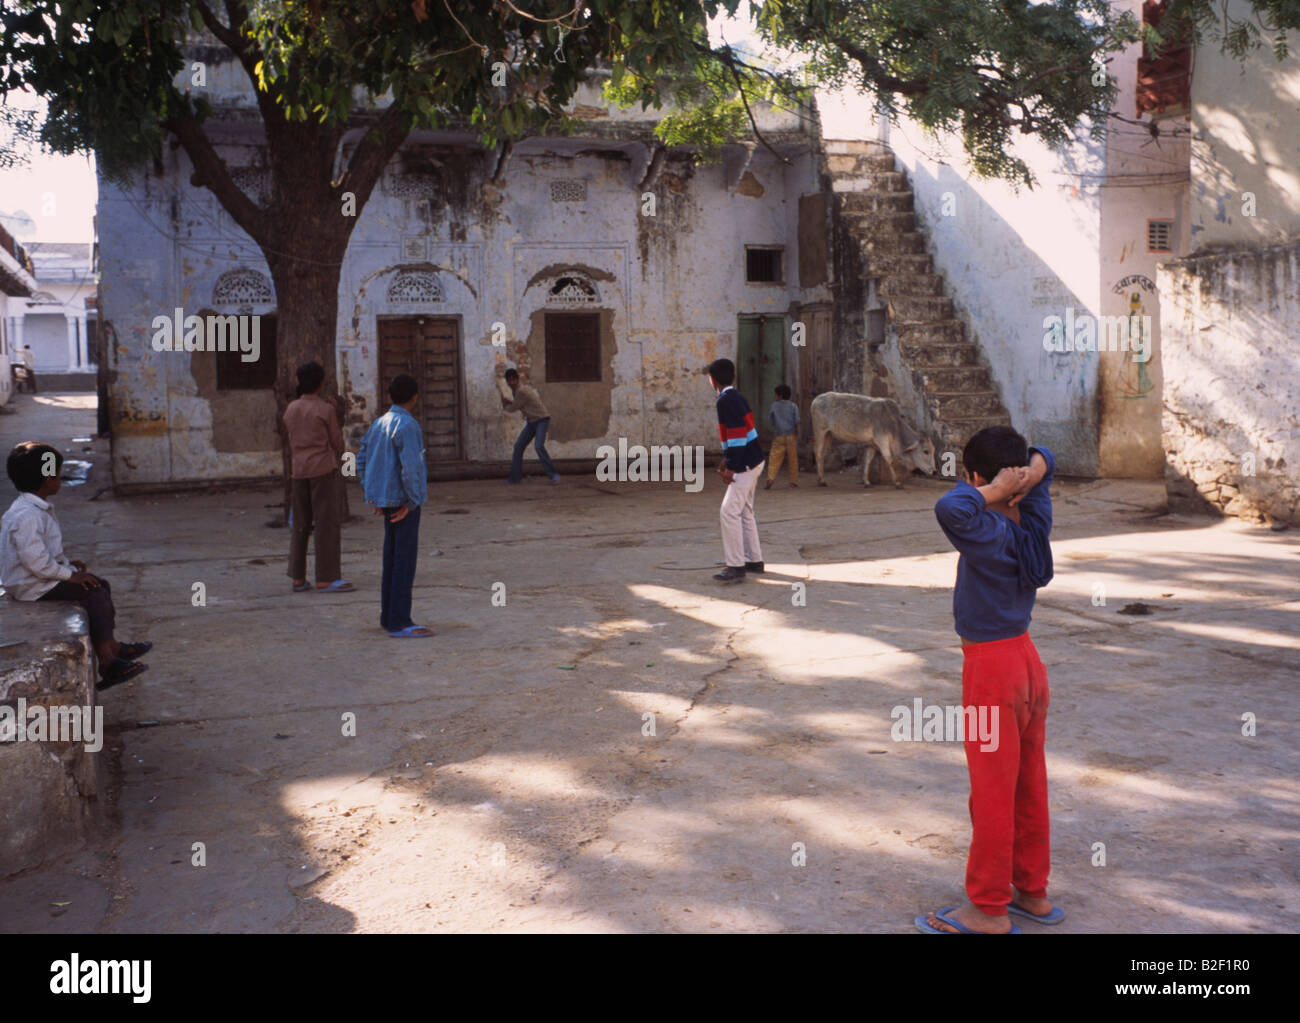 kids playing cricket in streets, India Stock Photo